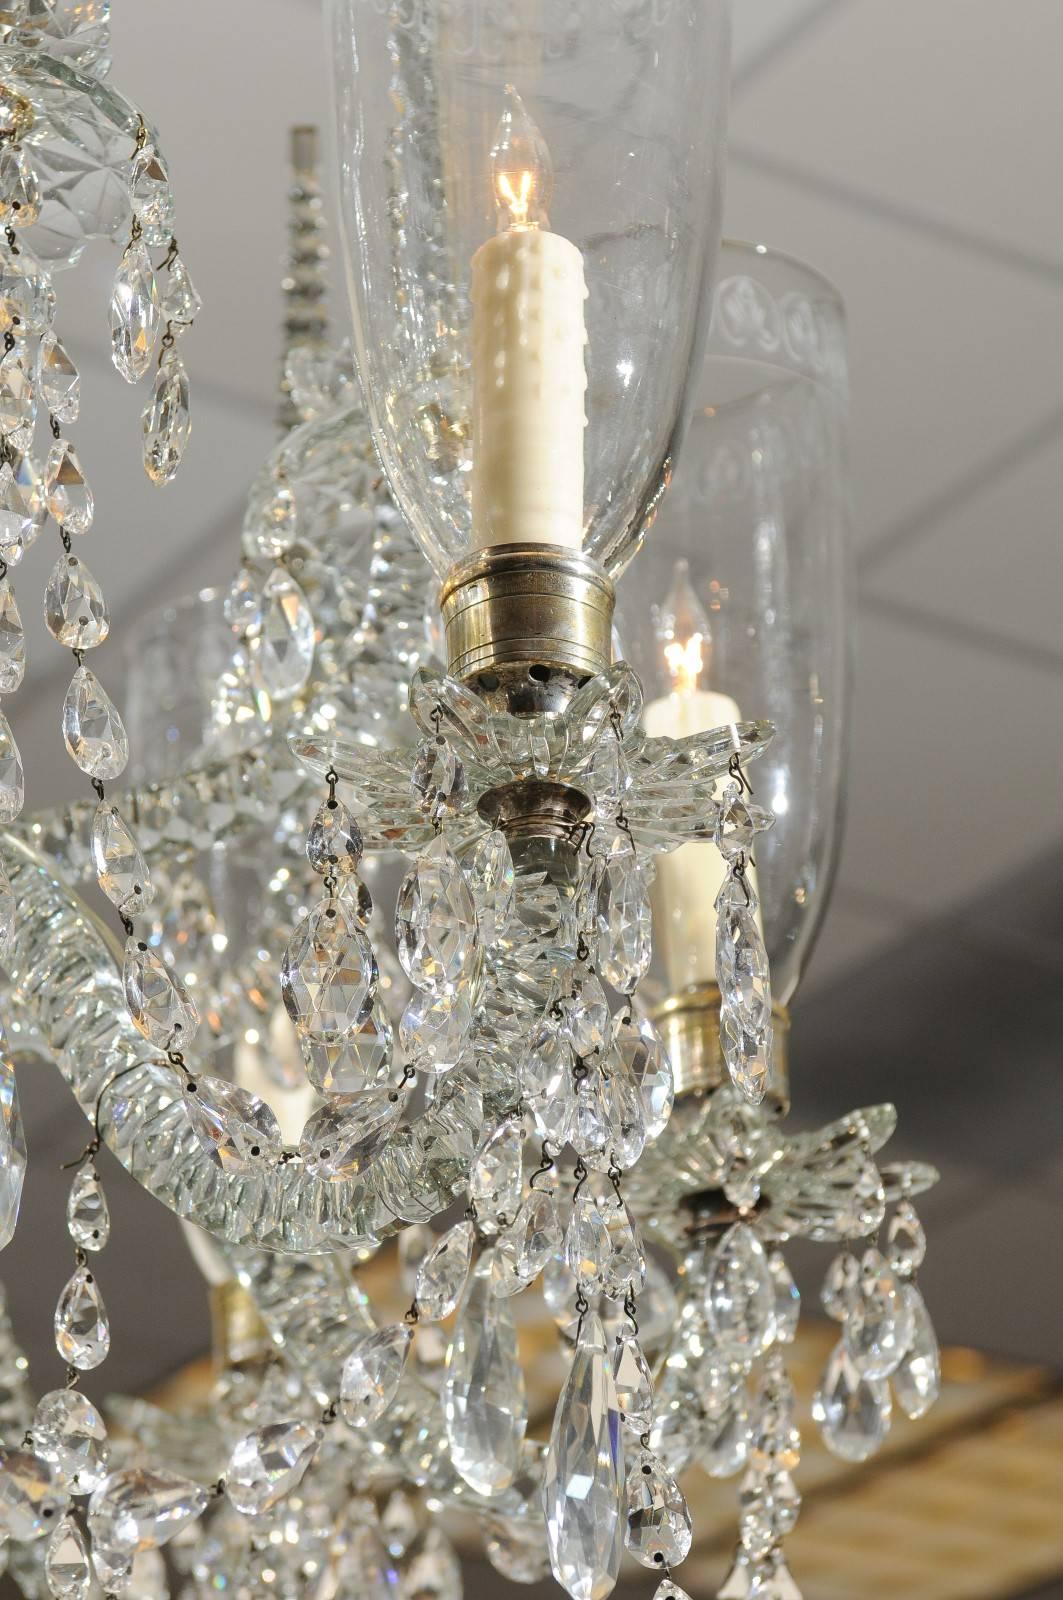 Mid-19th Century Irish Waterford Crystal Eight-Arm Chandelier For Sale 3